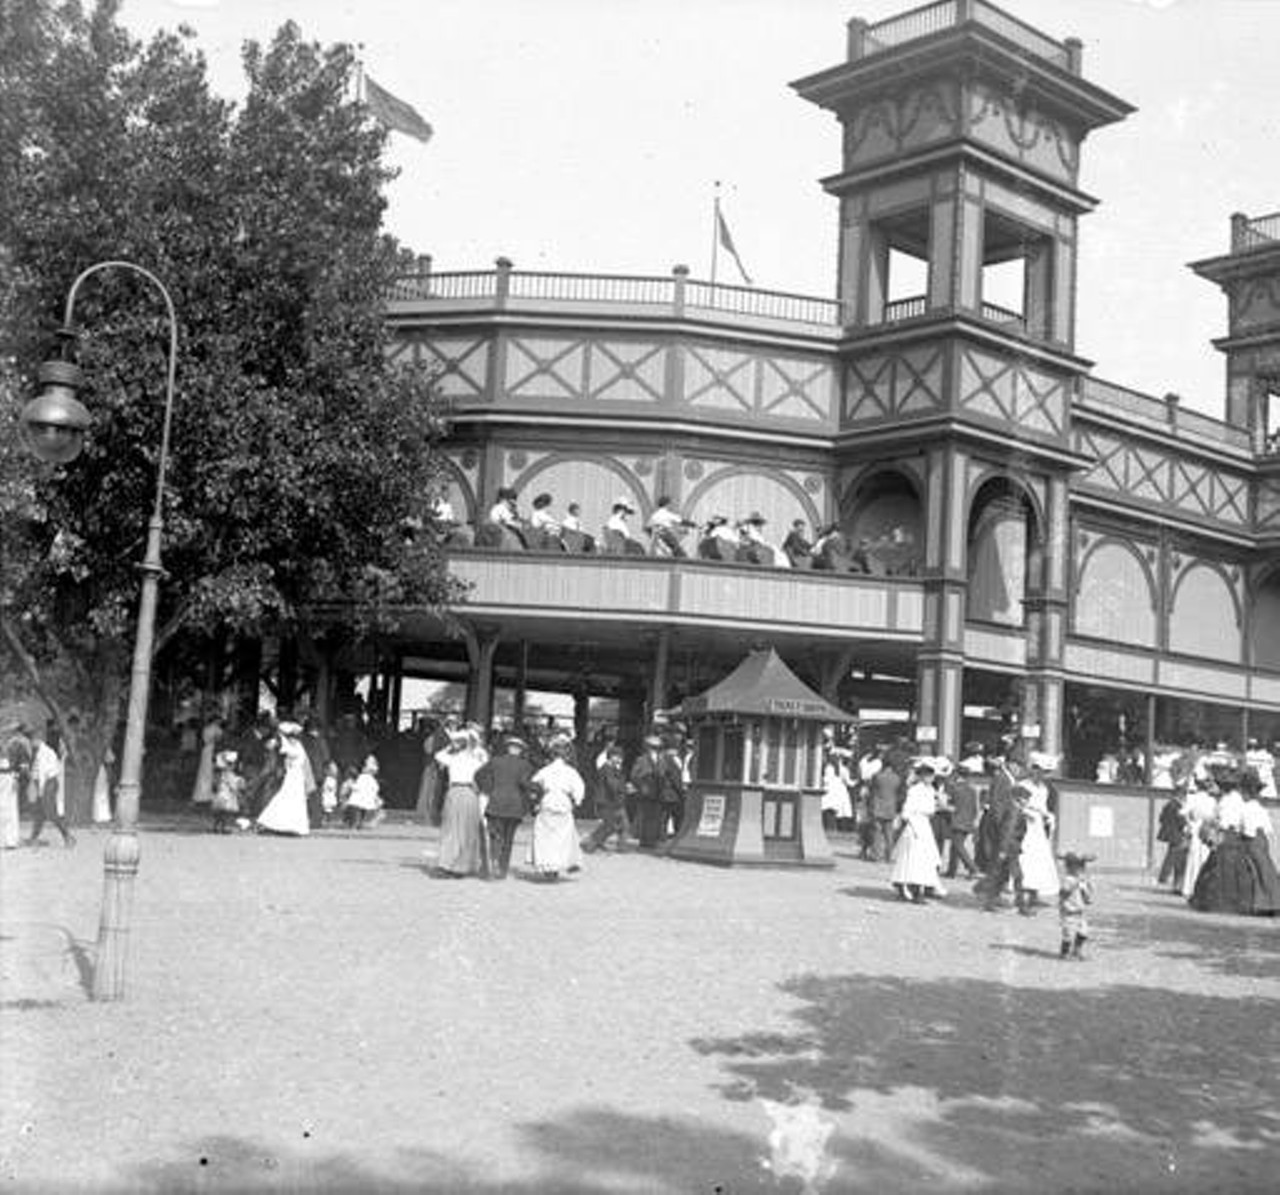 Opened in 1907, the Scenic Railway roller coaster was one of Euclid Beach's early rides.